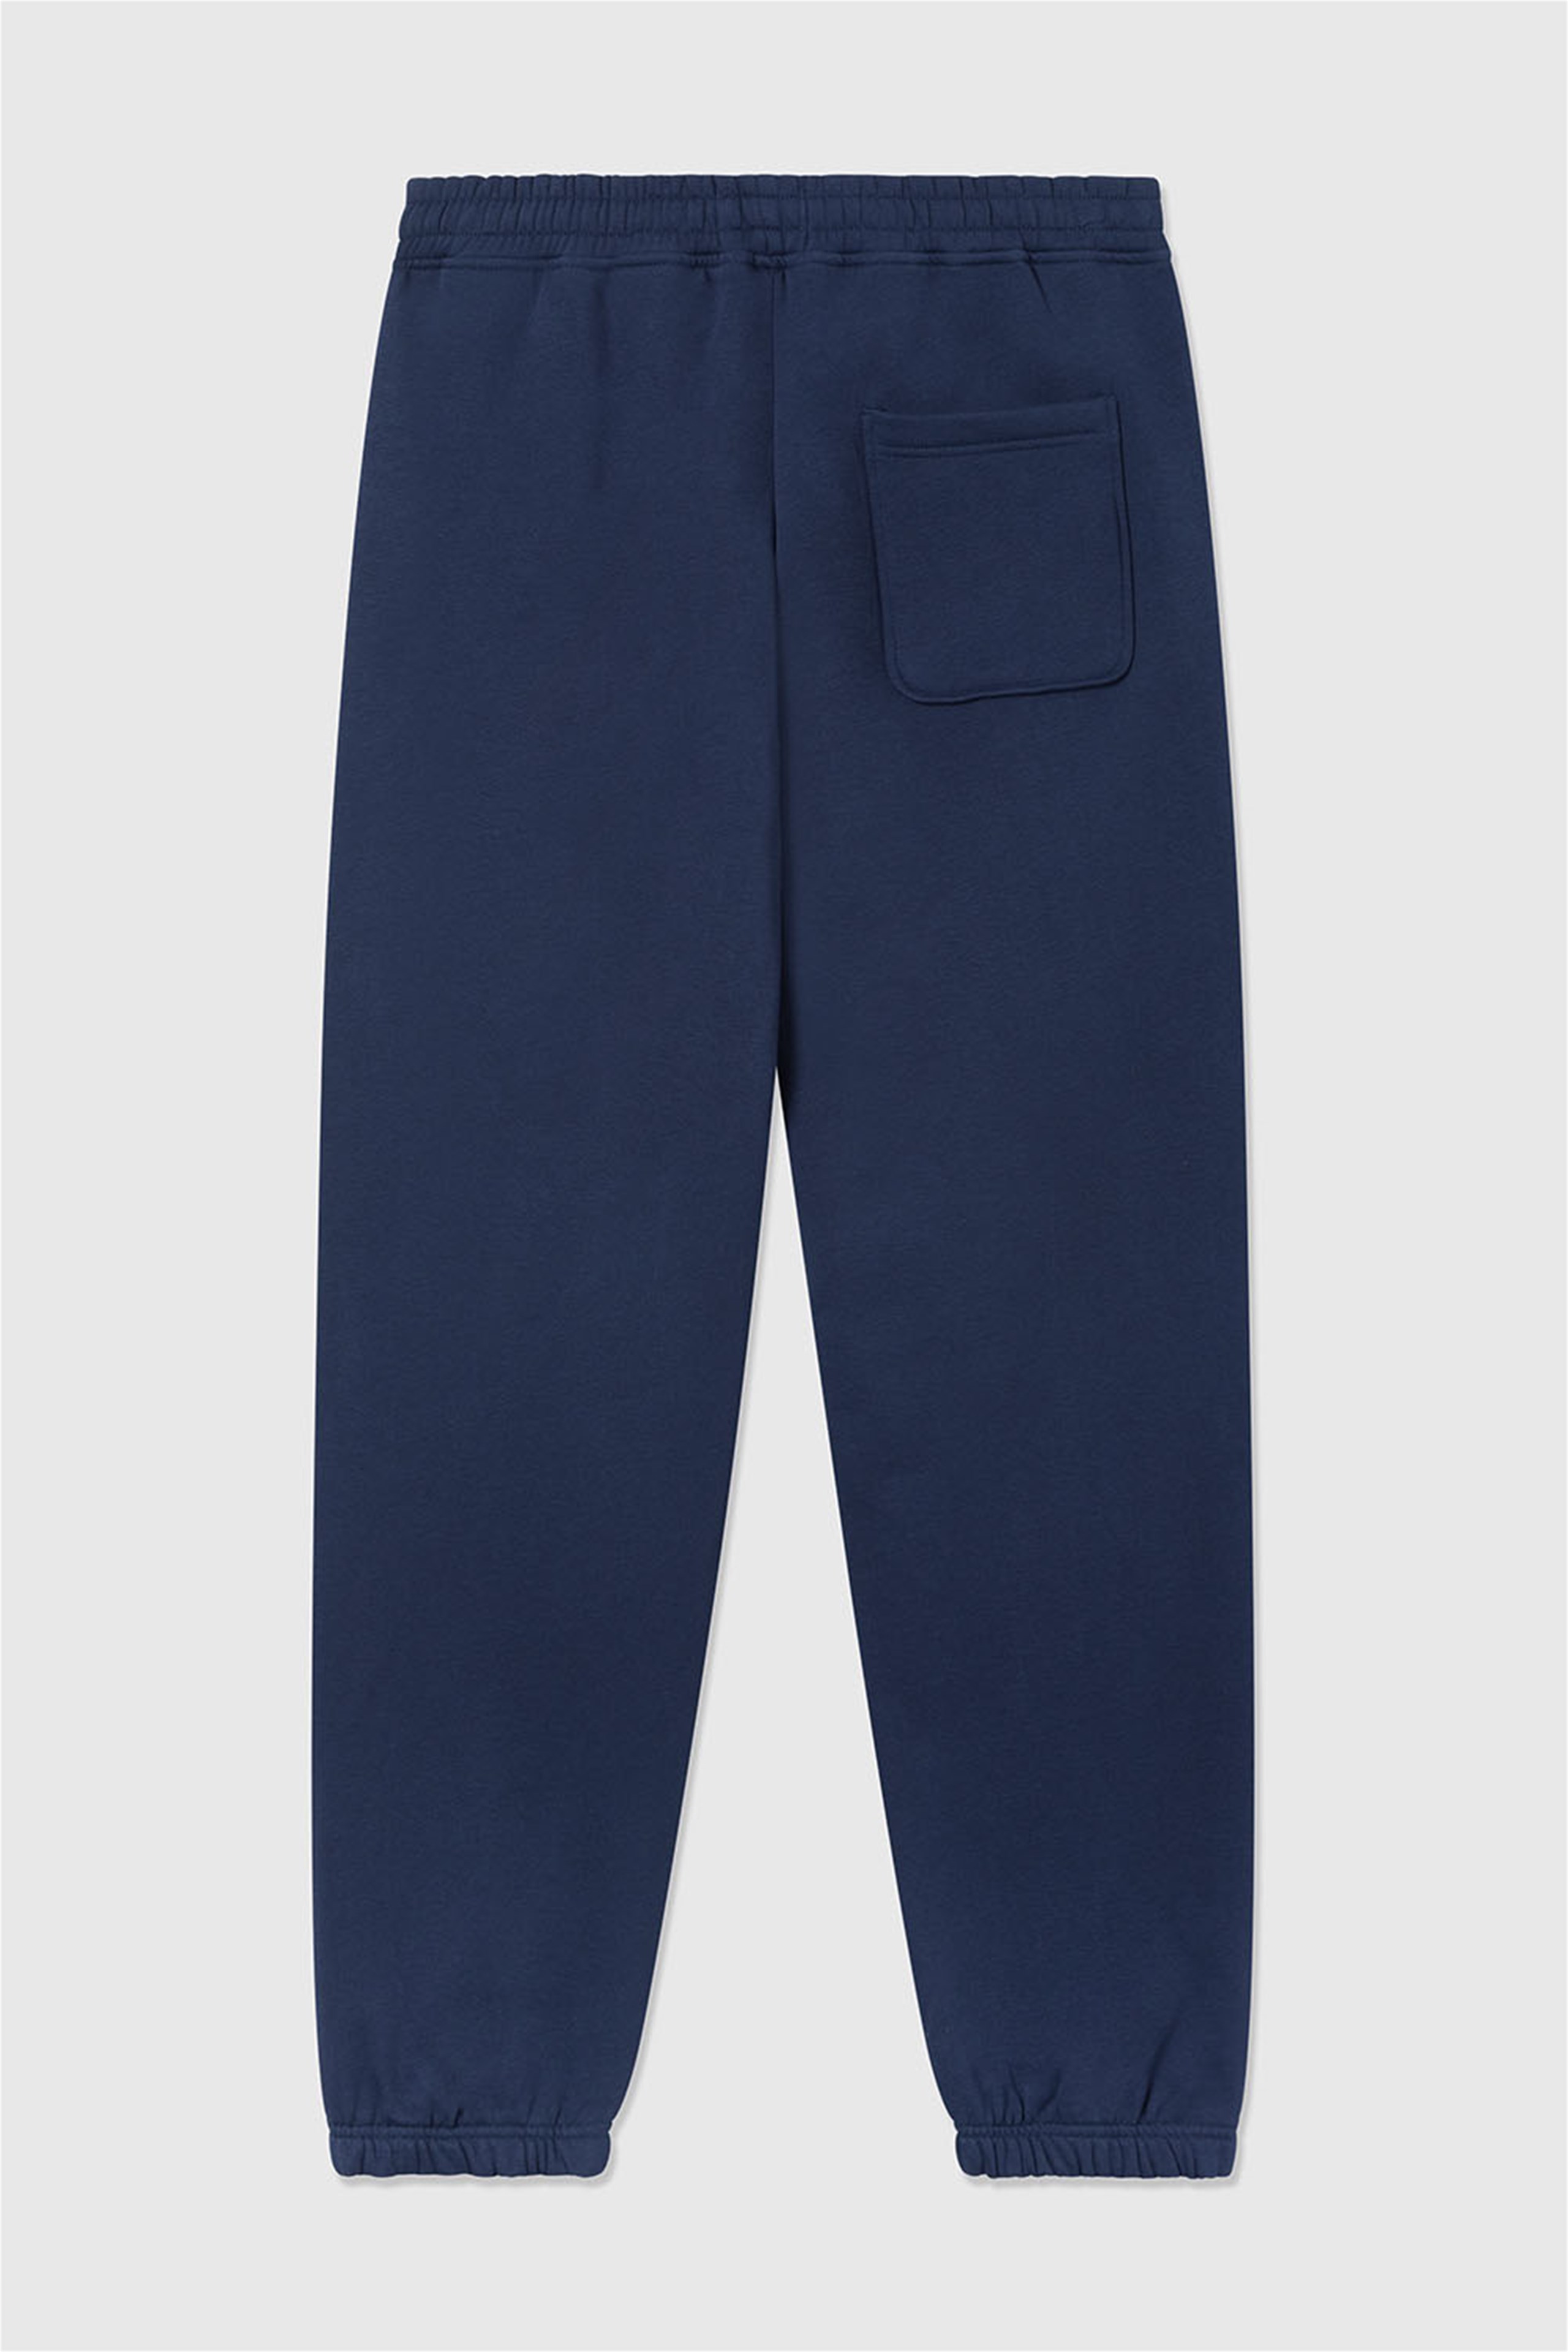 Double A by Wood Wood Cal arch joggers Navy | WoodWood.com